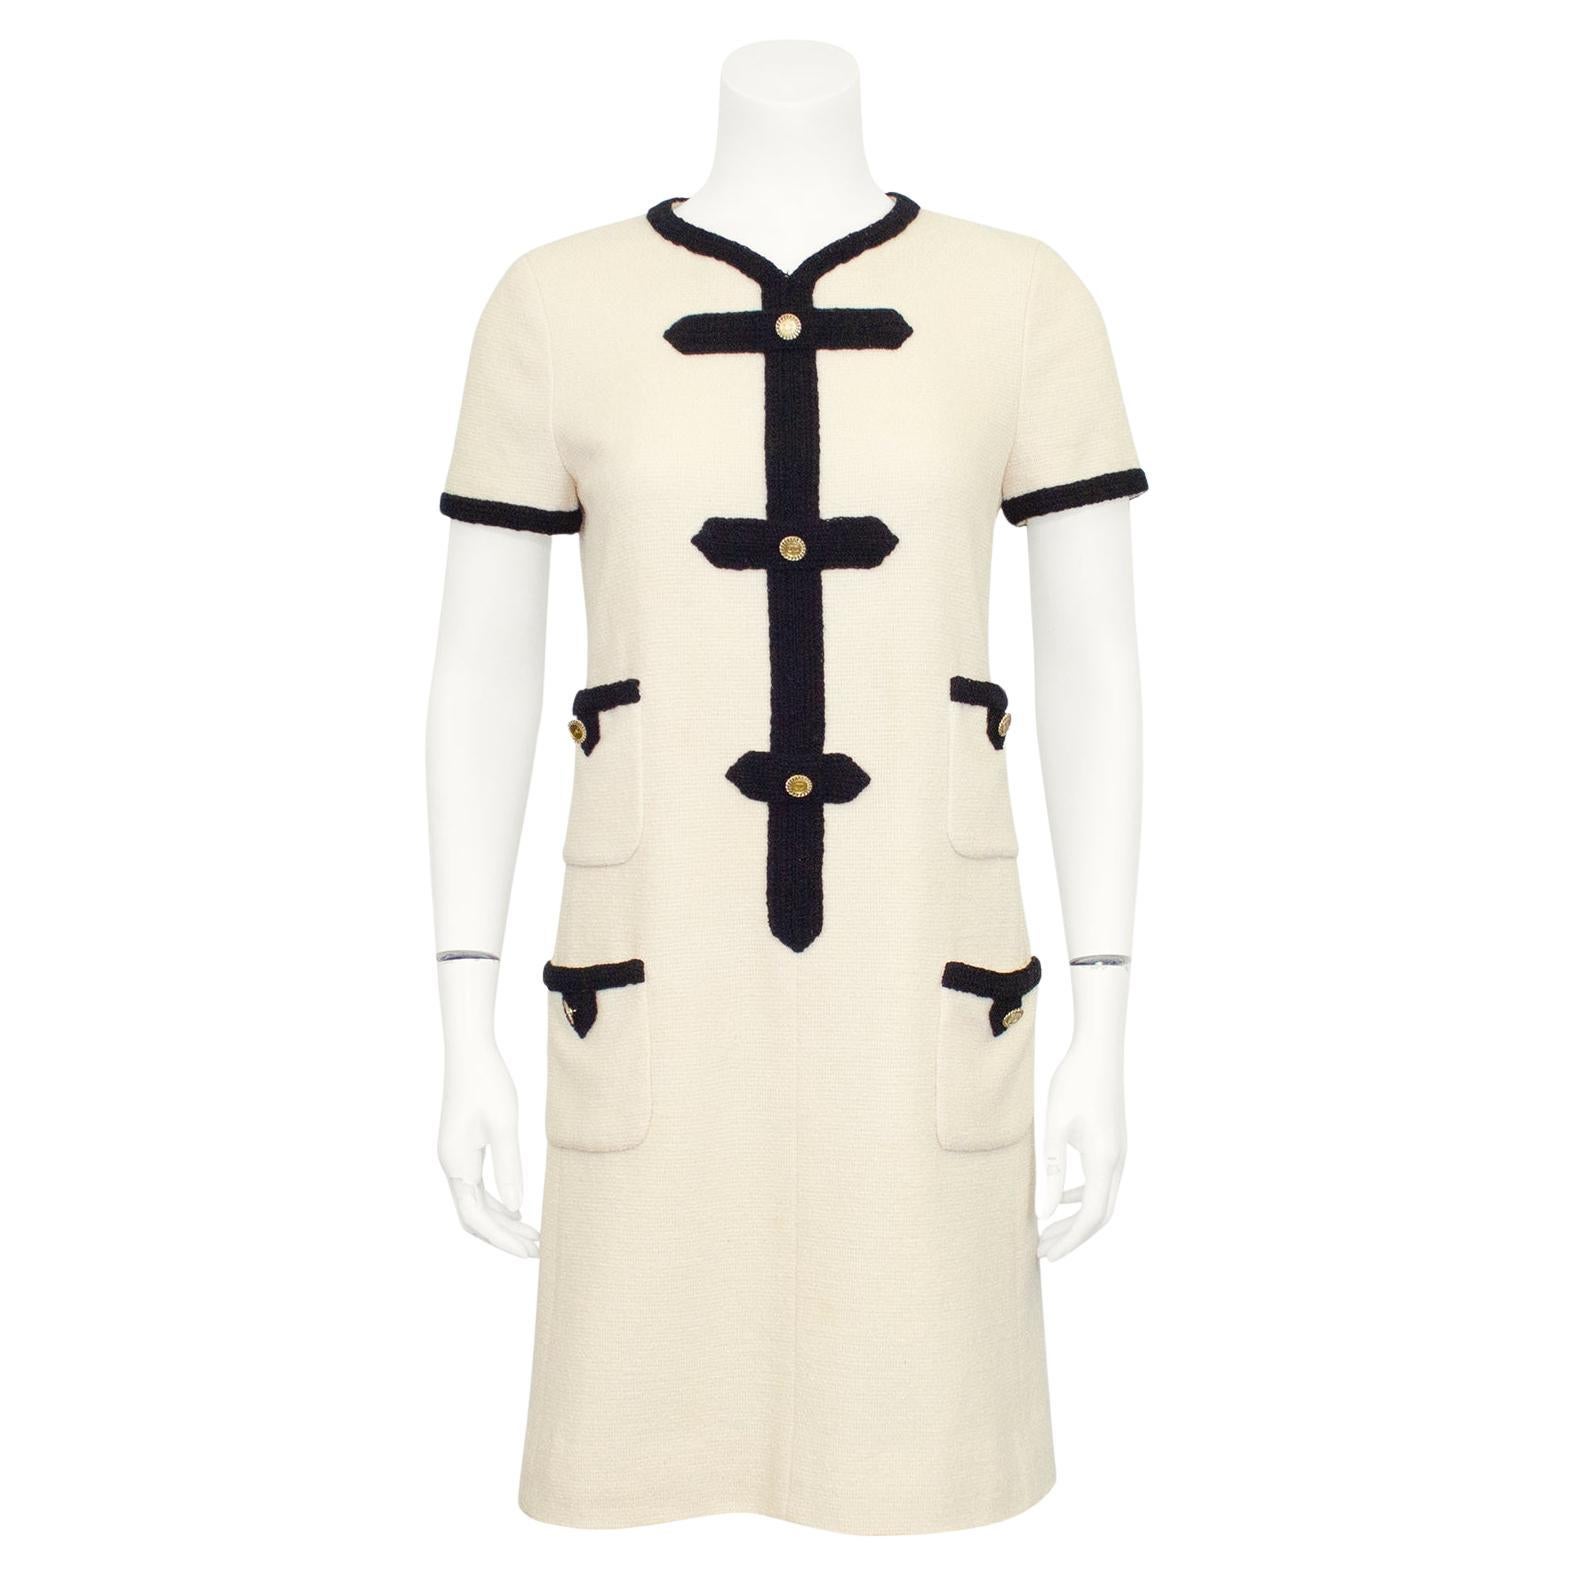 Chanel Autumn/Winter 2005 Cream Wool Dress with Black Passimenterie Trim For Sale